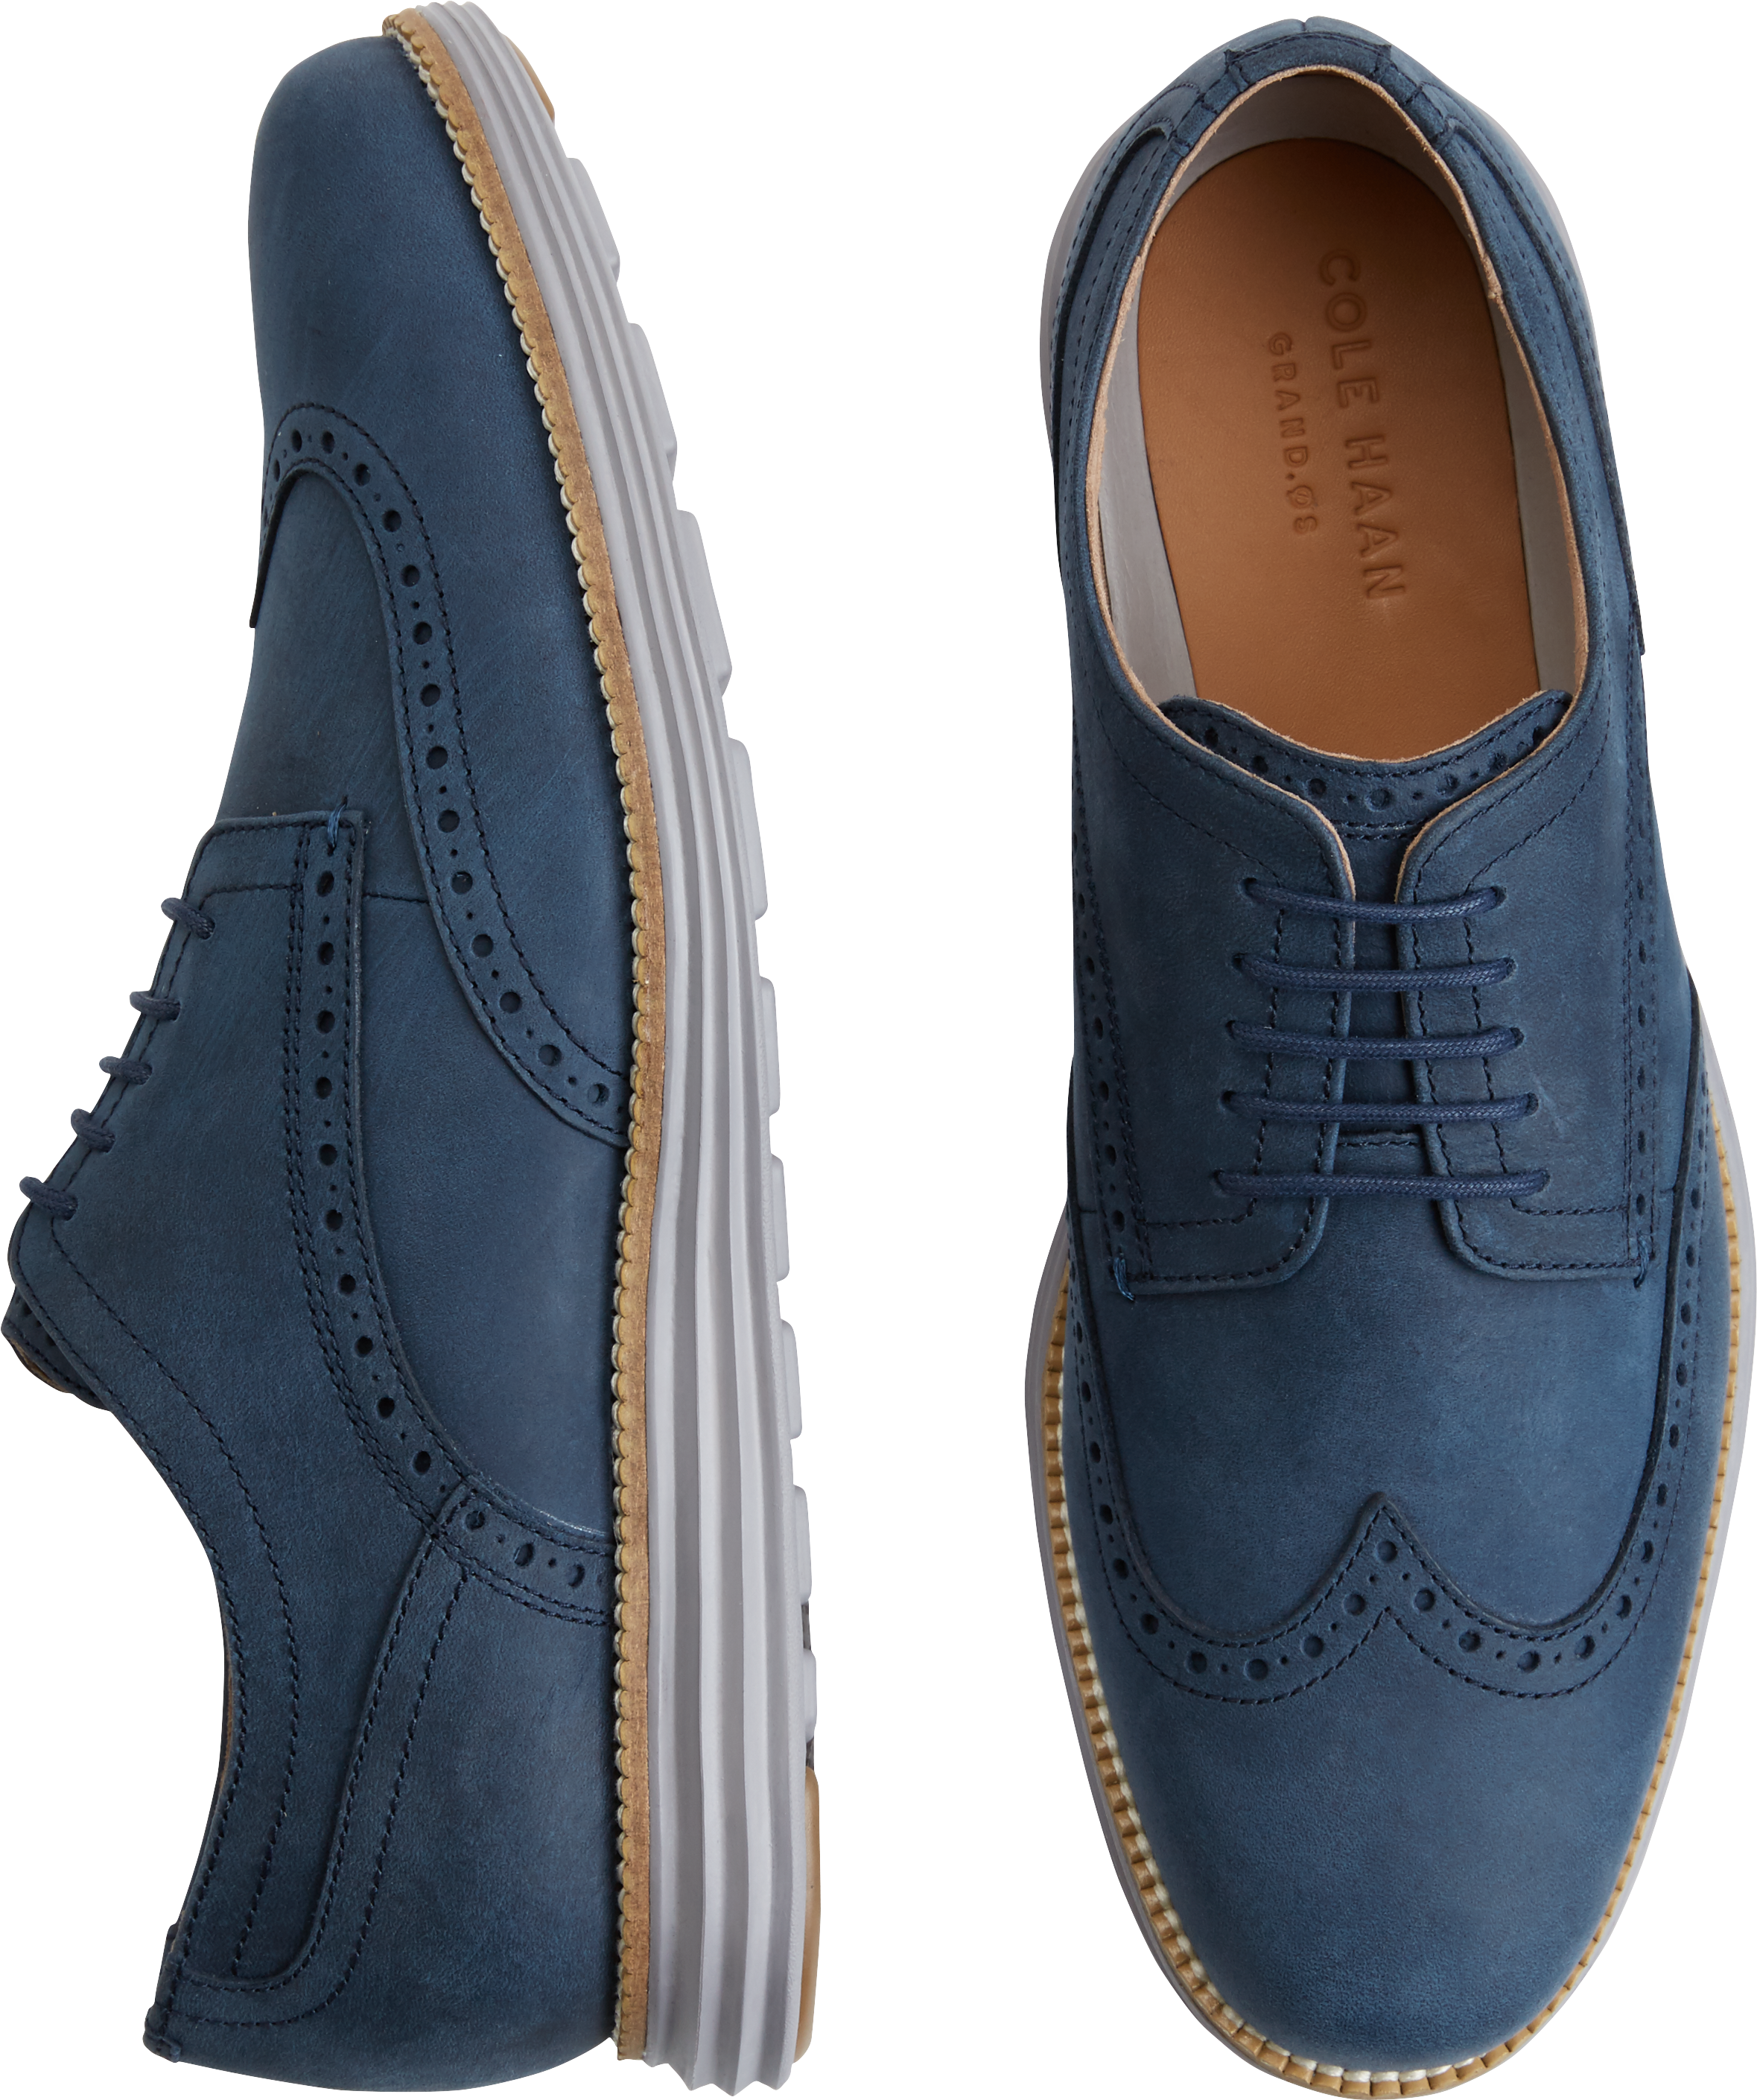 navy blue wingtip shoes